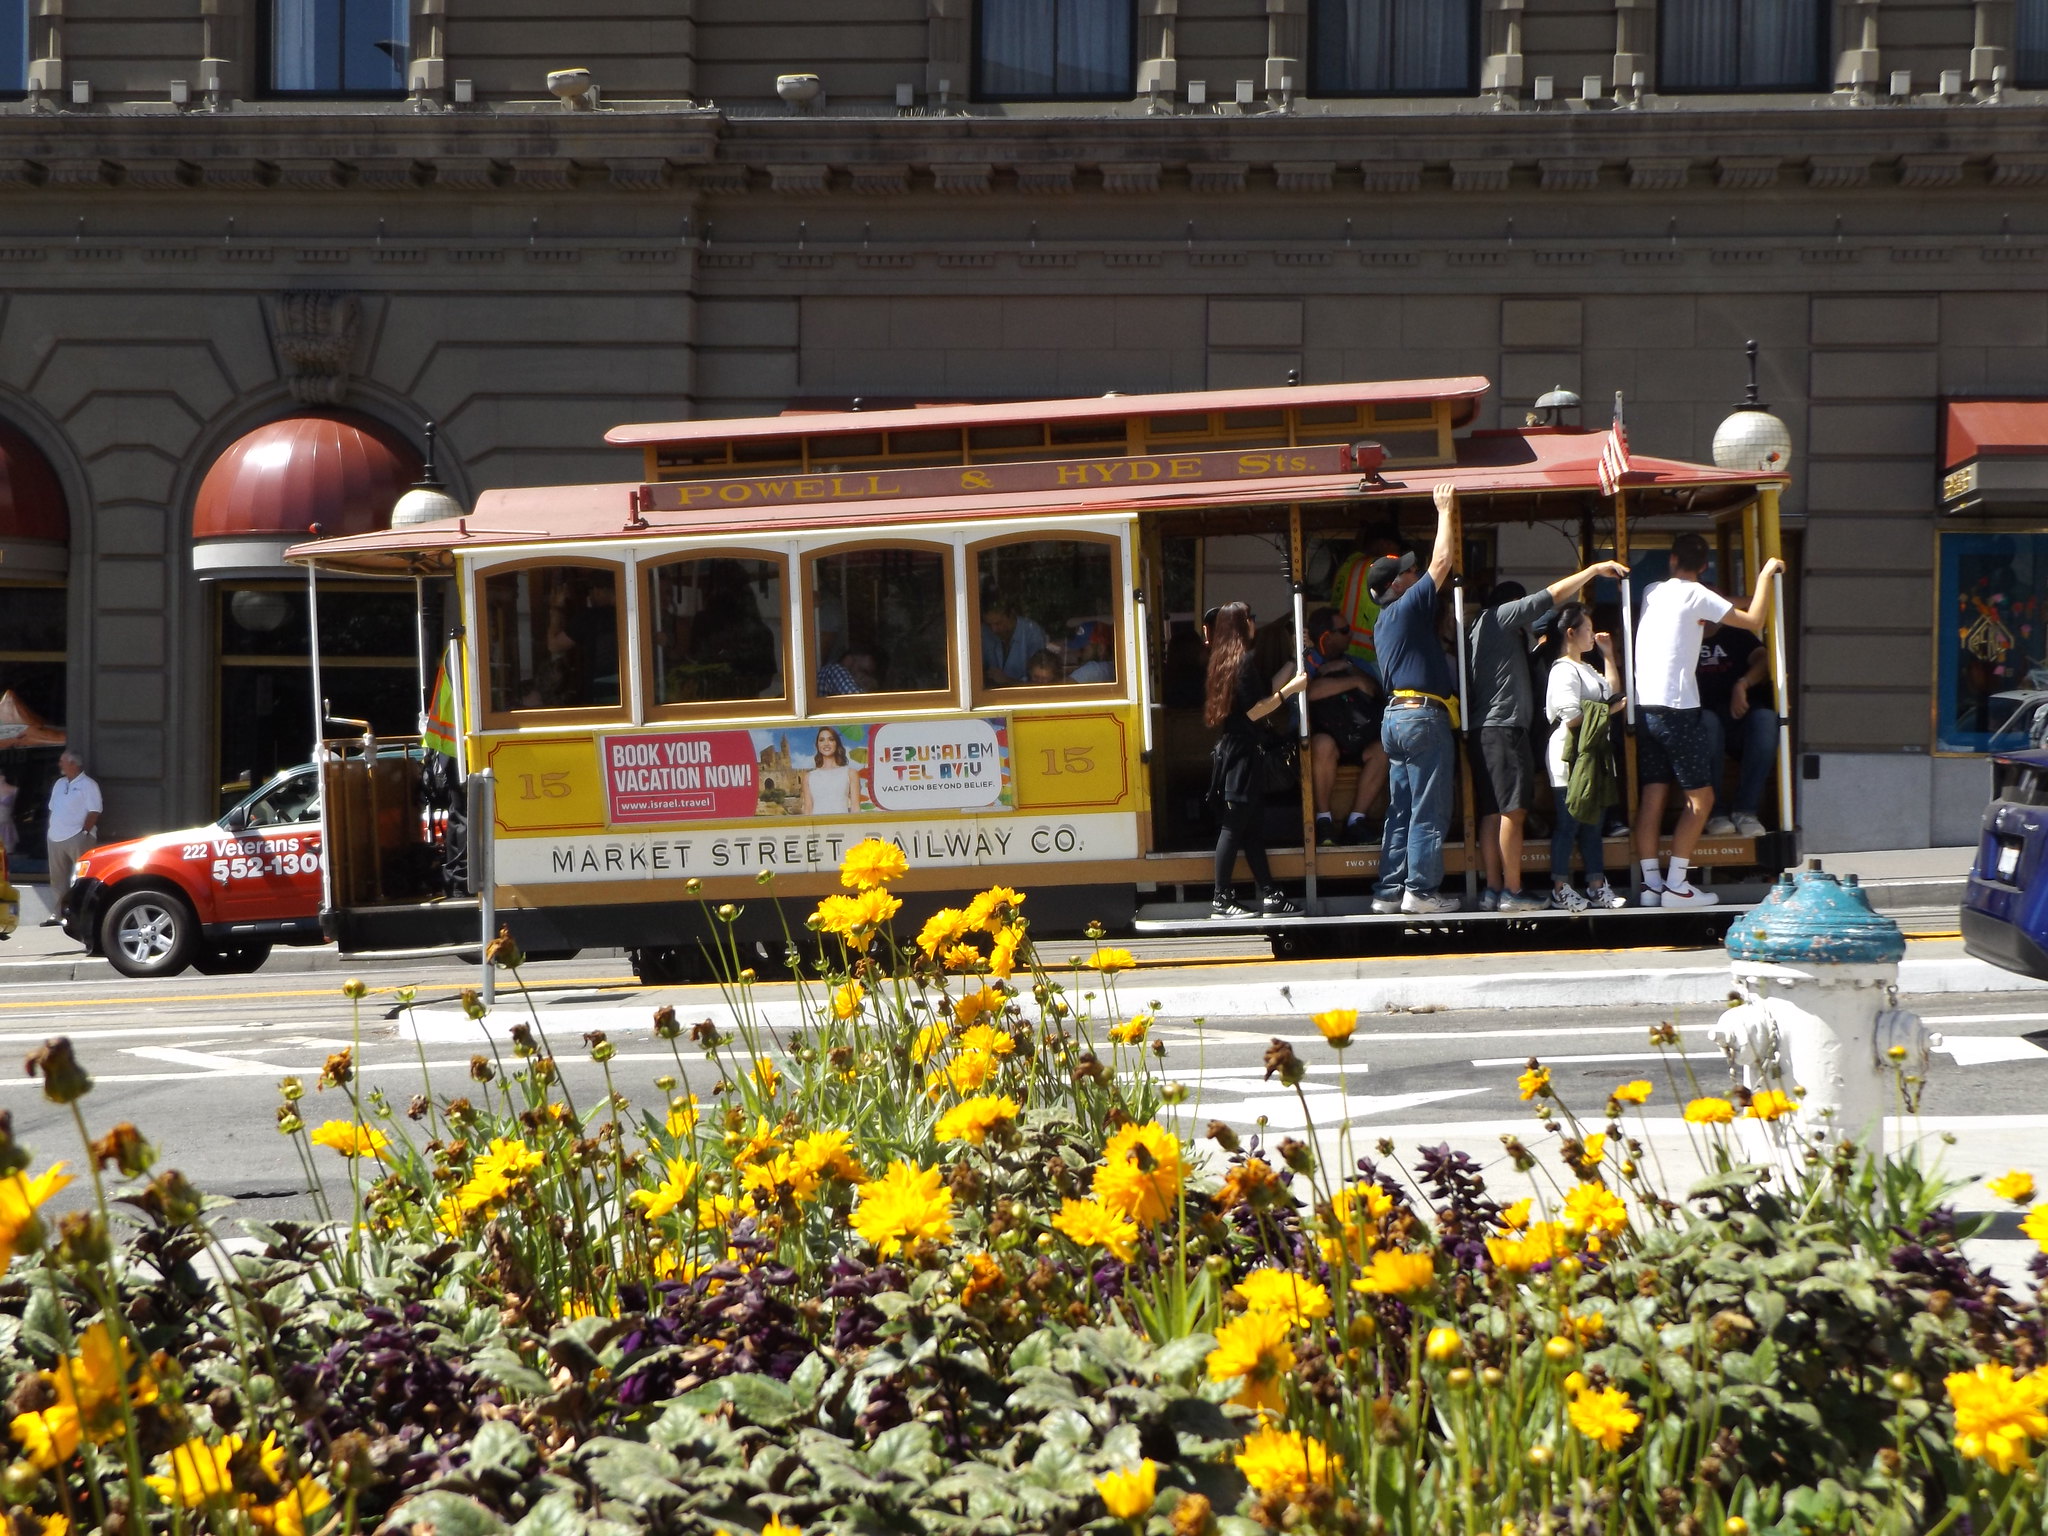 Powell-Hyde Cable Car in Union Square, San Francisco, California, USA, 10 September 2018